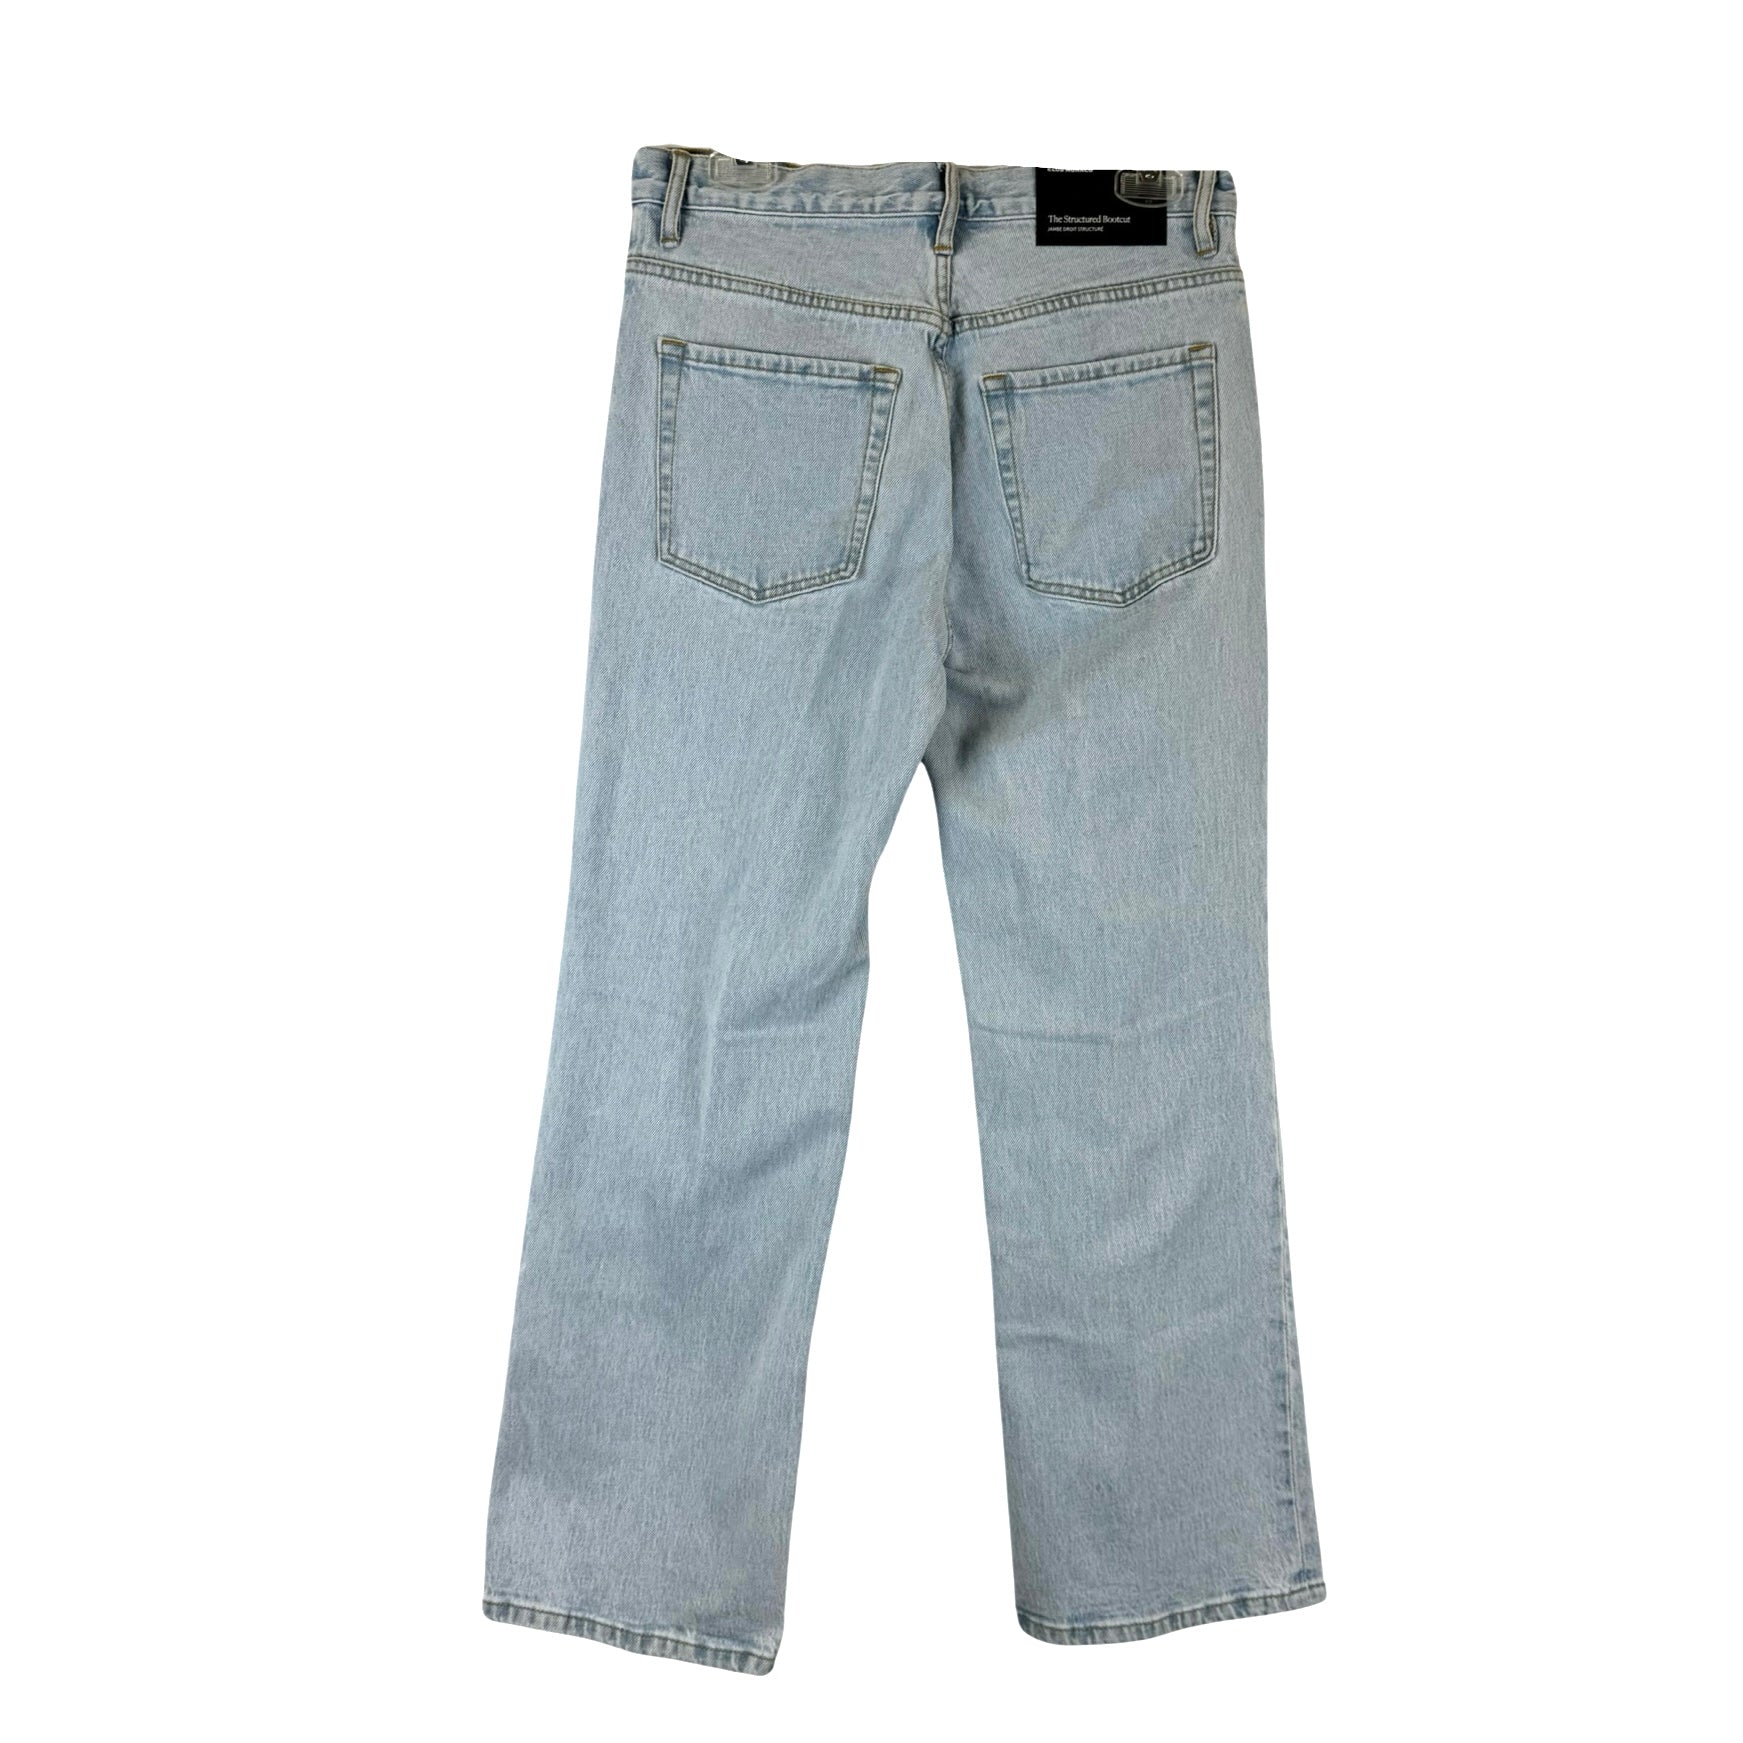 Club Monaco The Structured Bootcut Jeans